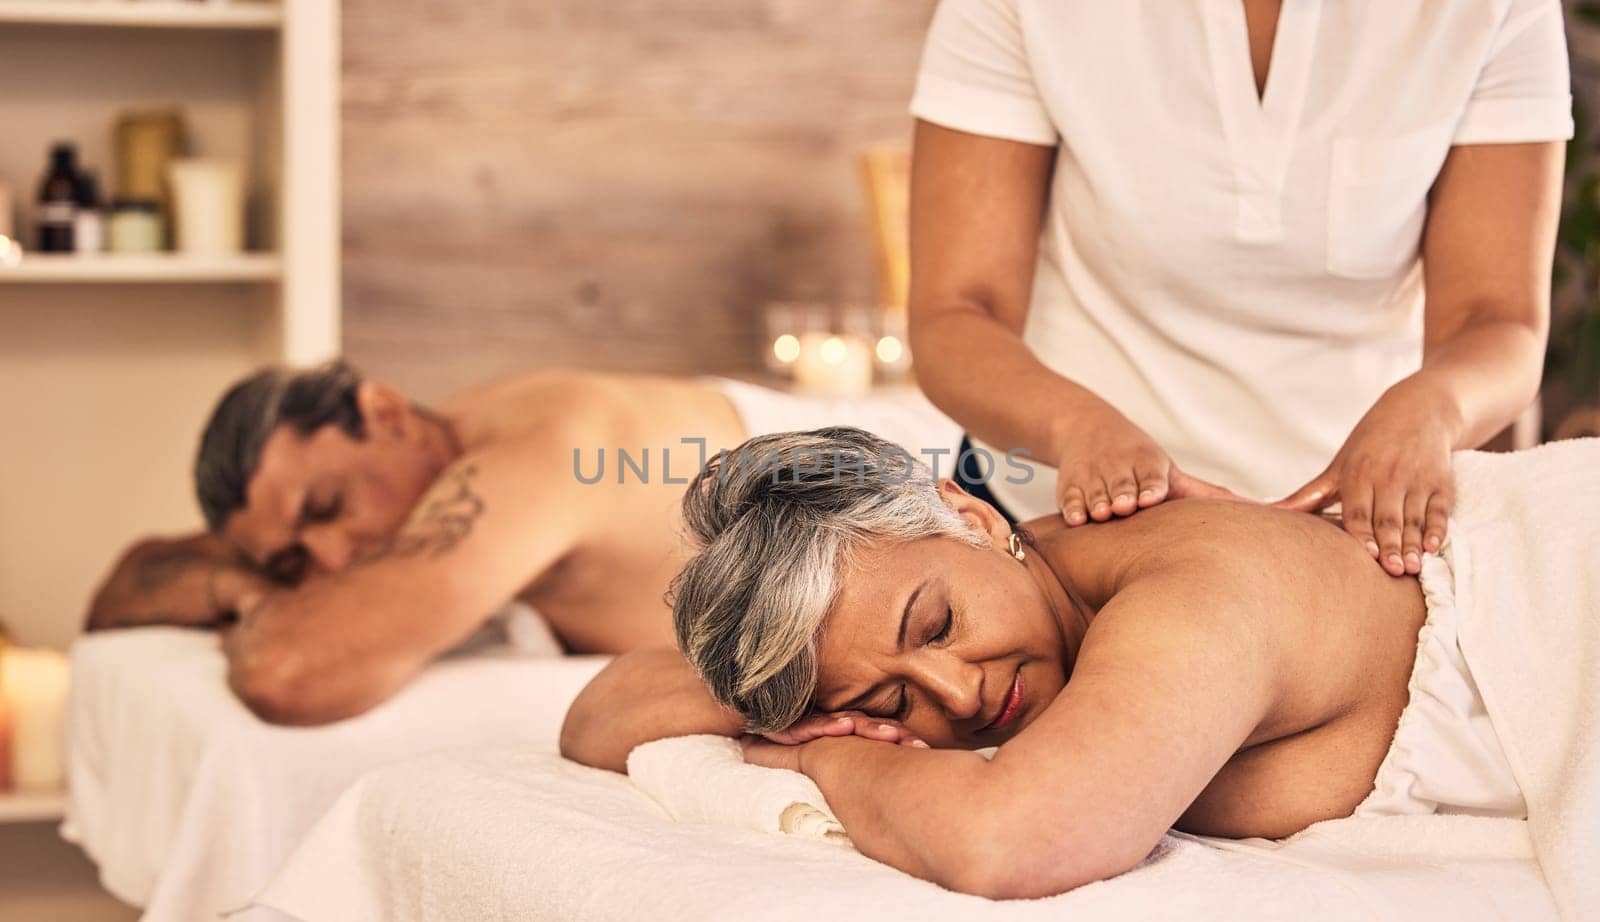 Relax, senior and a couple at the spa for a massage together for peace, wellness or bonding. Luxury, hospitality or body care with an old woman and man in a beauty salon for physical therapy.